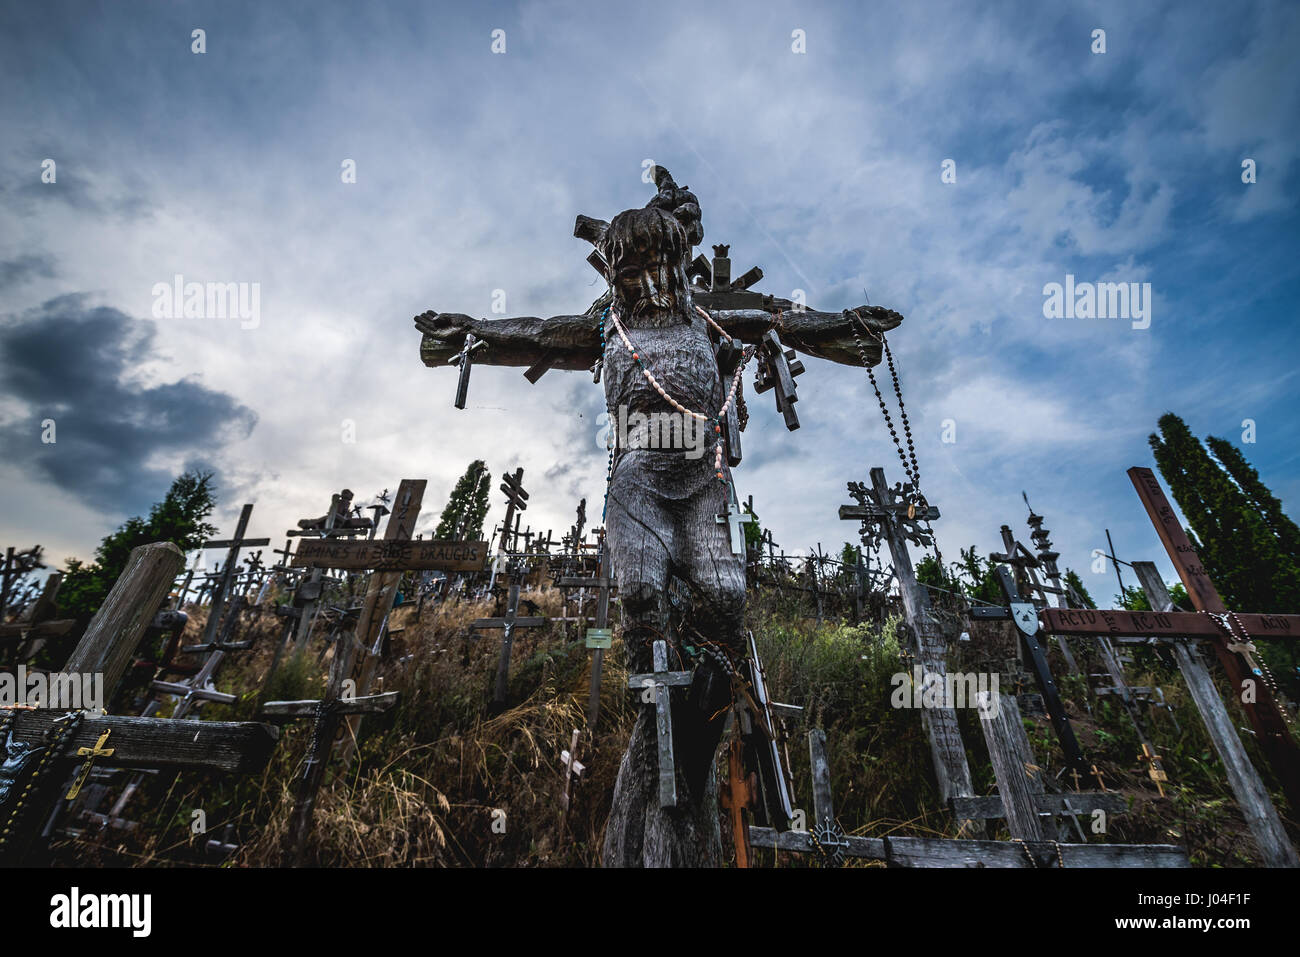 Wooden cross with Jesus sculpture on Hill of Crosses in Lithuania Stock Photo